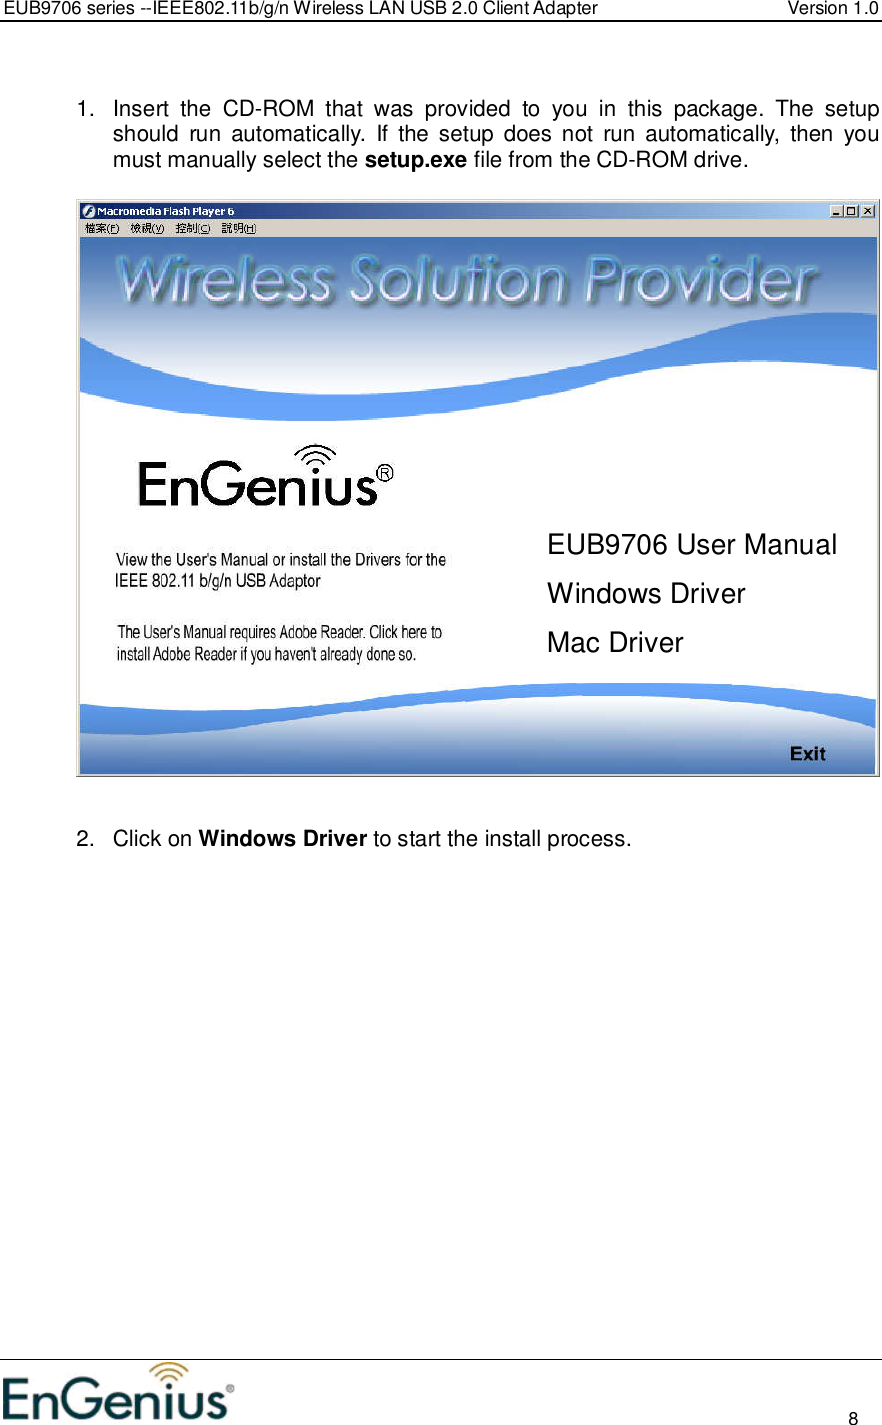 EUB9706 series --IEEE802.11b/g/n Wireless LAN USB 2.0 Client Adapter  Version 1.0                                                                                                                          8   1.  Insert  the  CD-ROM  that  was  provided  to  you  in  this  package.  The  setup should  run  automatically.  If  the  setup  does  not  run  automatically,  then  you must manually select the setup.exe file from the CD-ROM drive.     2.  Click on Windows Driver to start the install process.  EUB9706 User Manual Windows Driver Mac Driver 